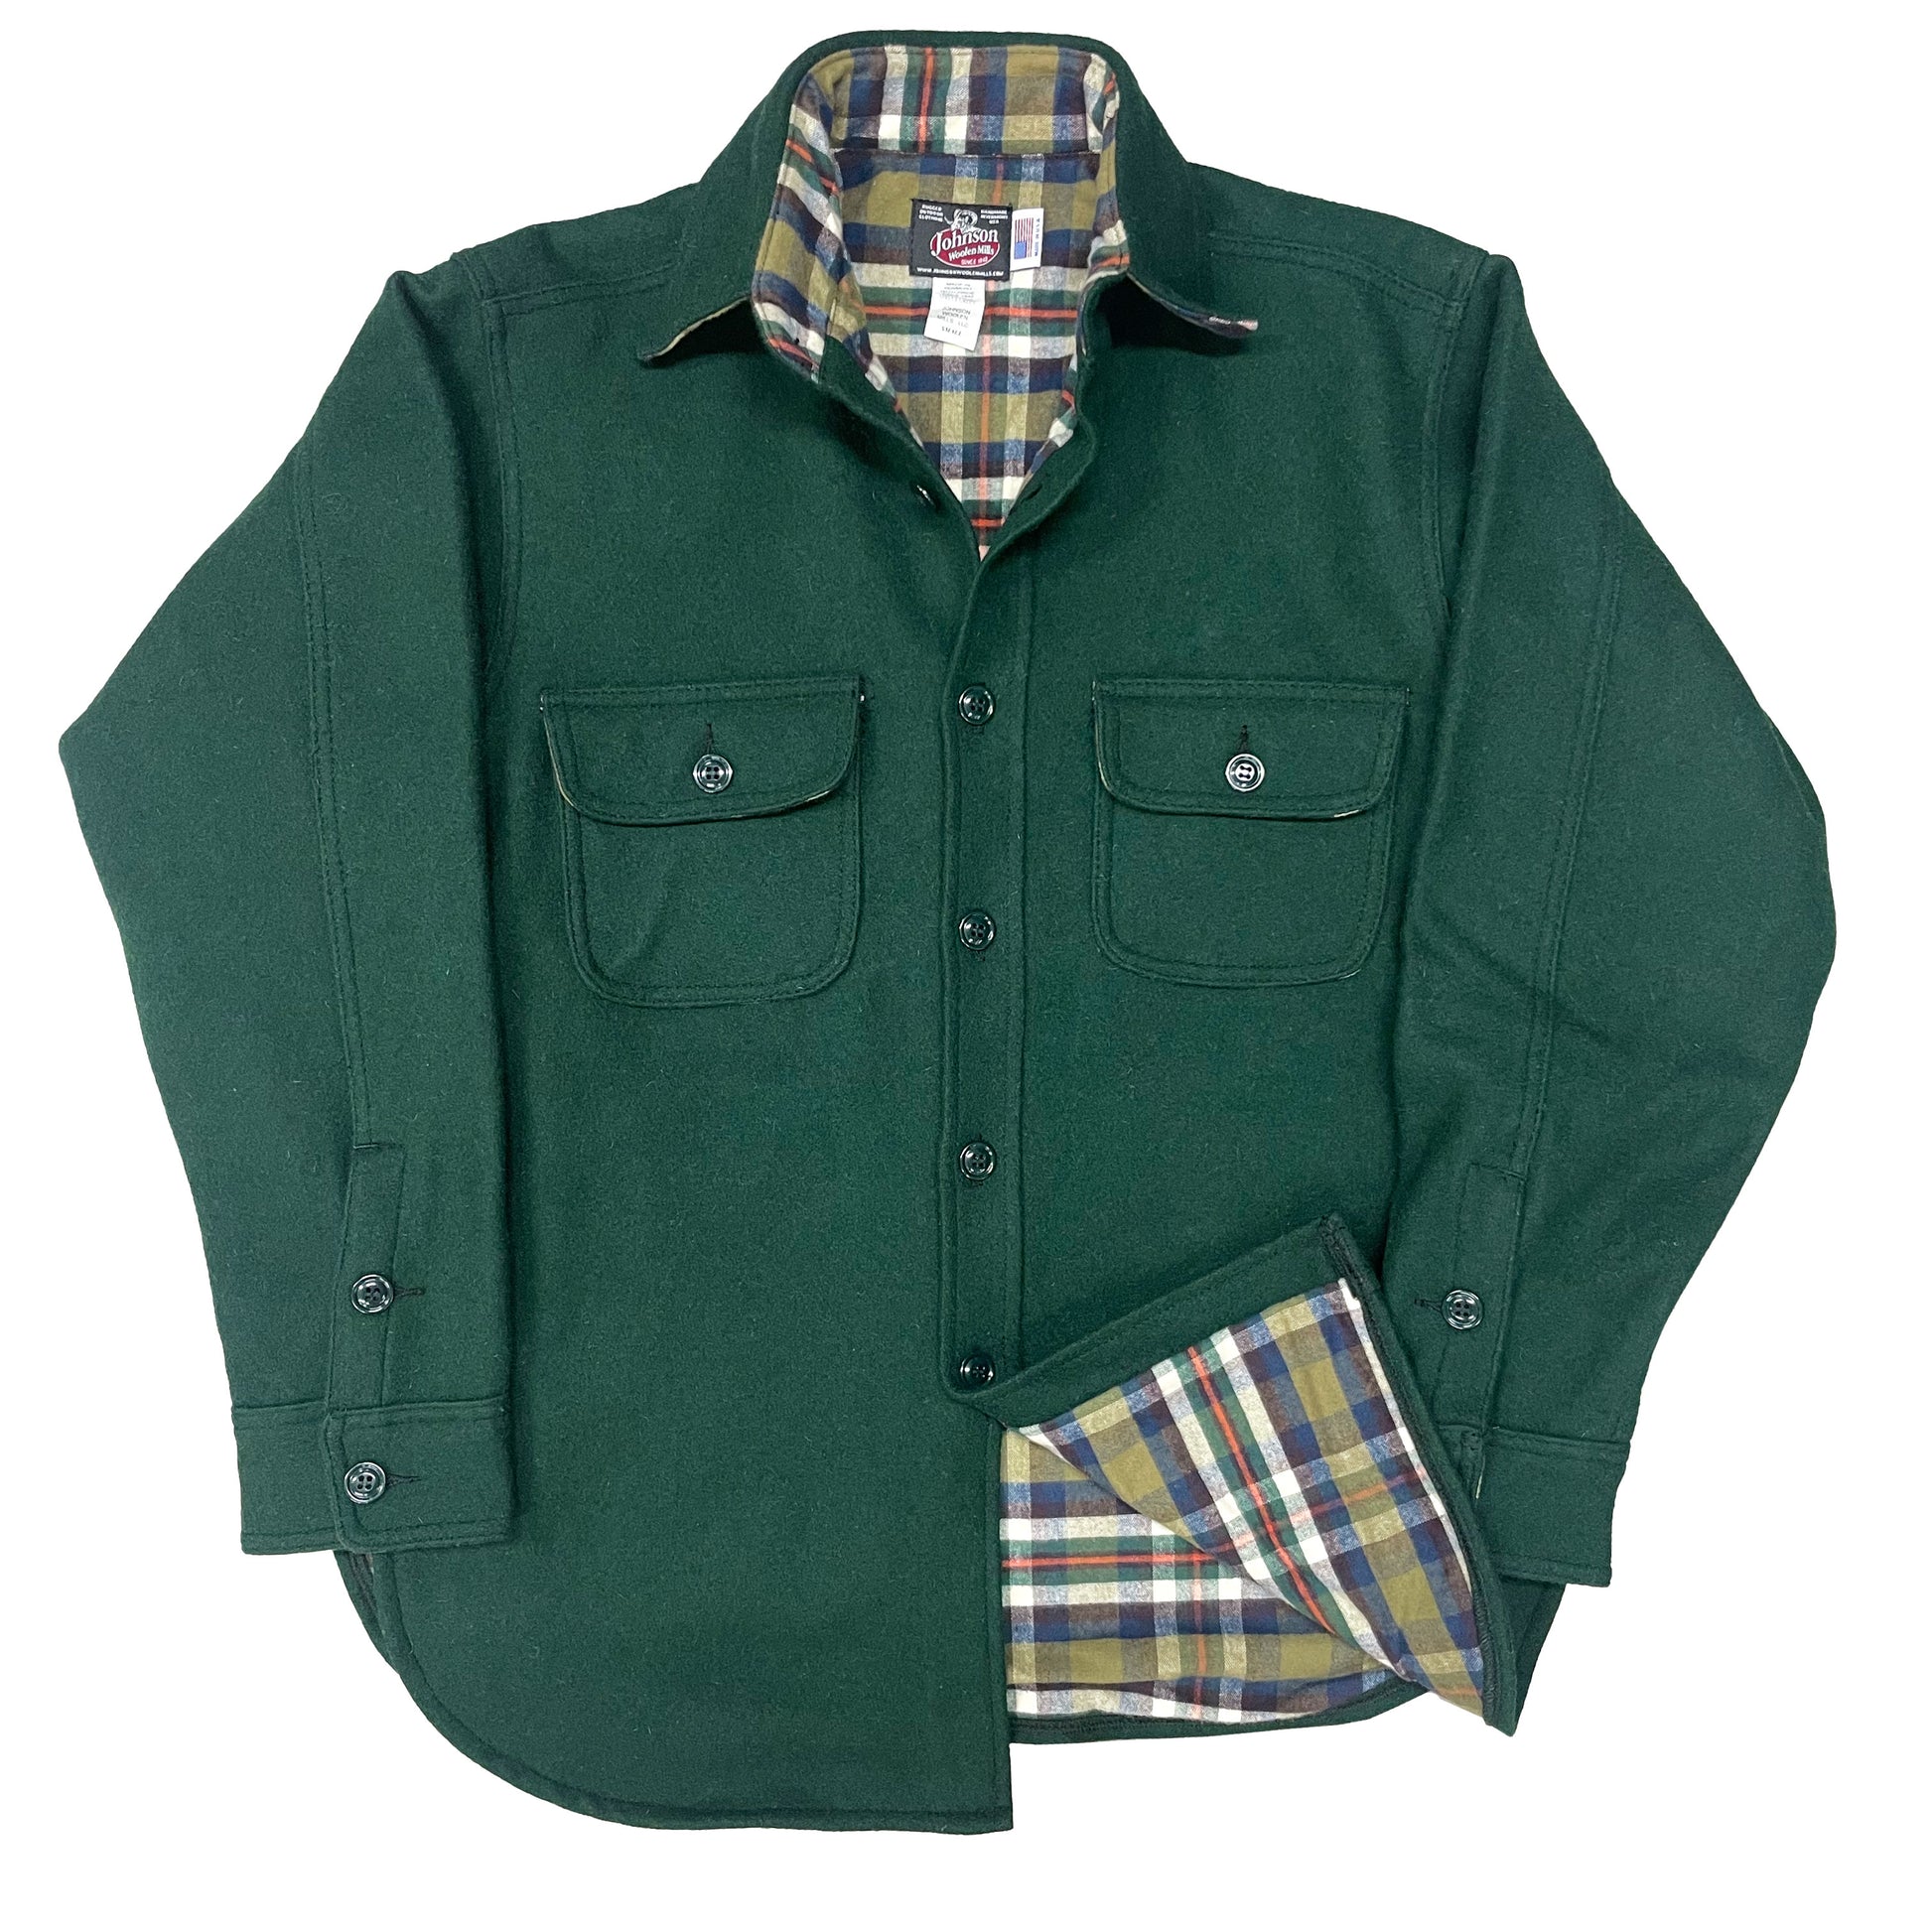 Long Tail Button Down long sleeve shirt with a 6 button front, button cuffs and two front chest pockets. Shown in spruce green.